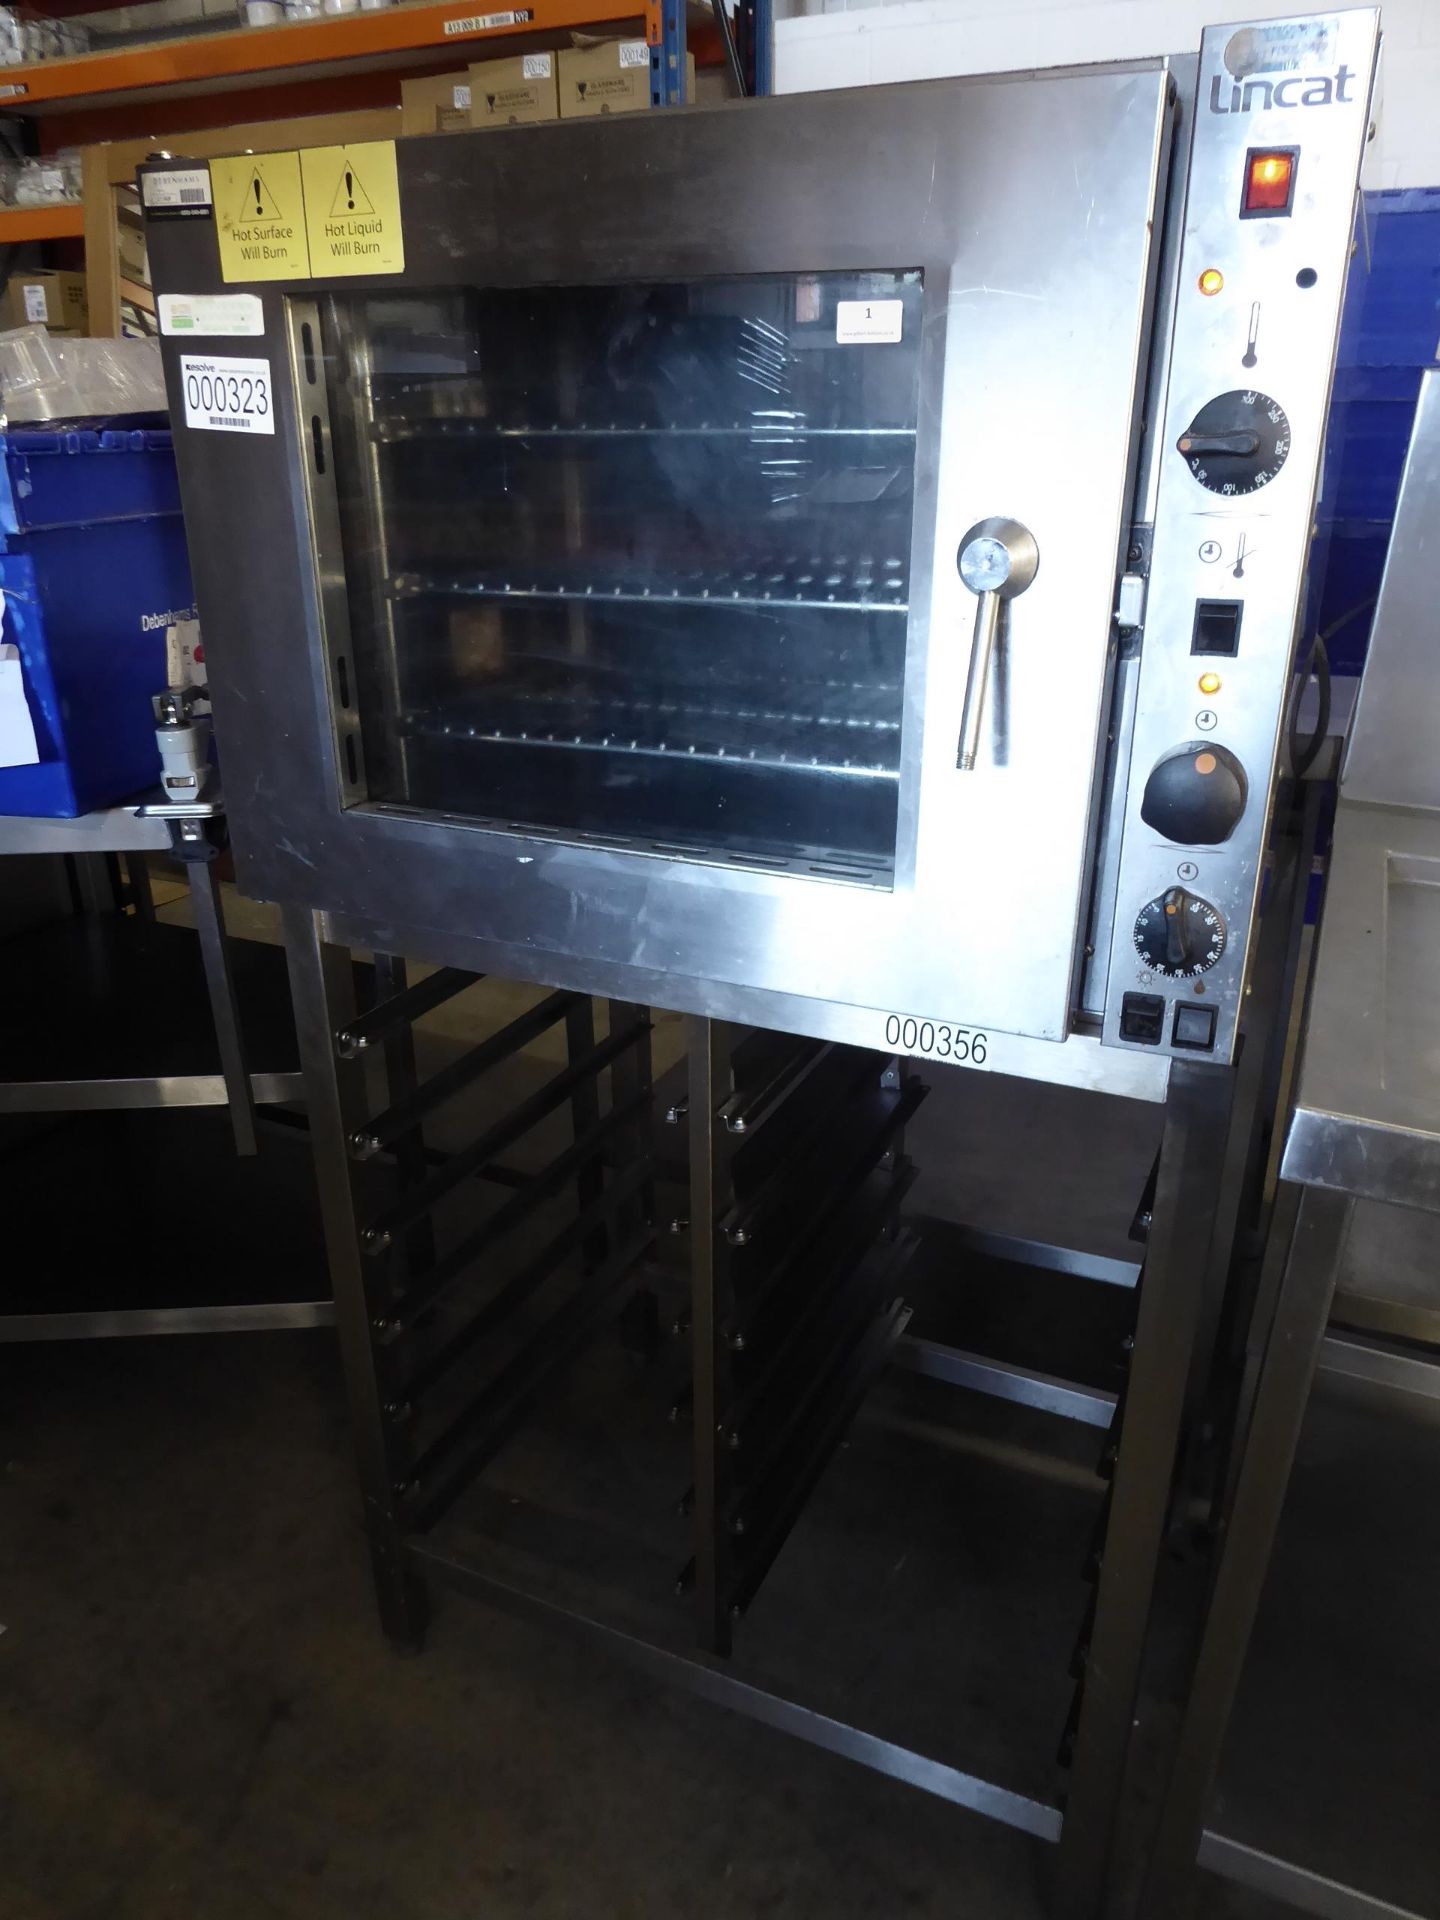 * lincat convection oven eco 8 on stand with rack - Image 4 of 7